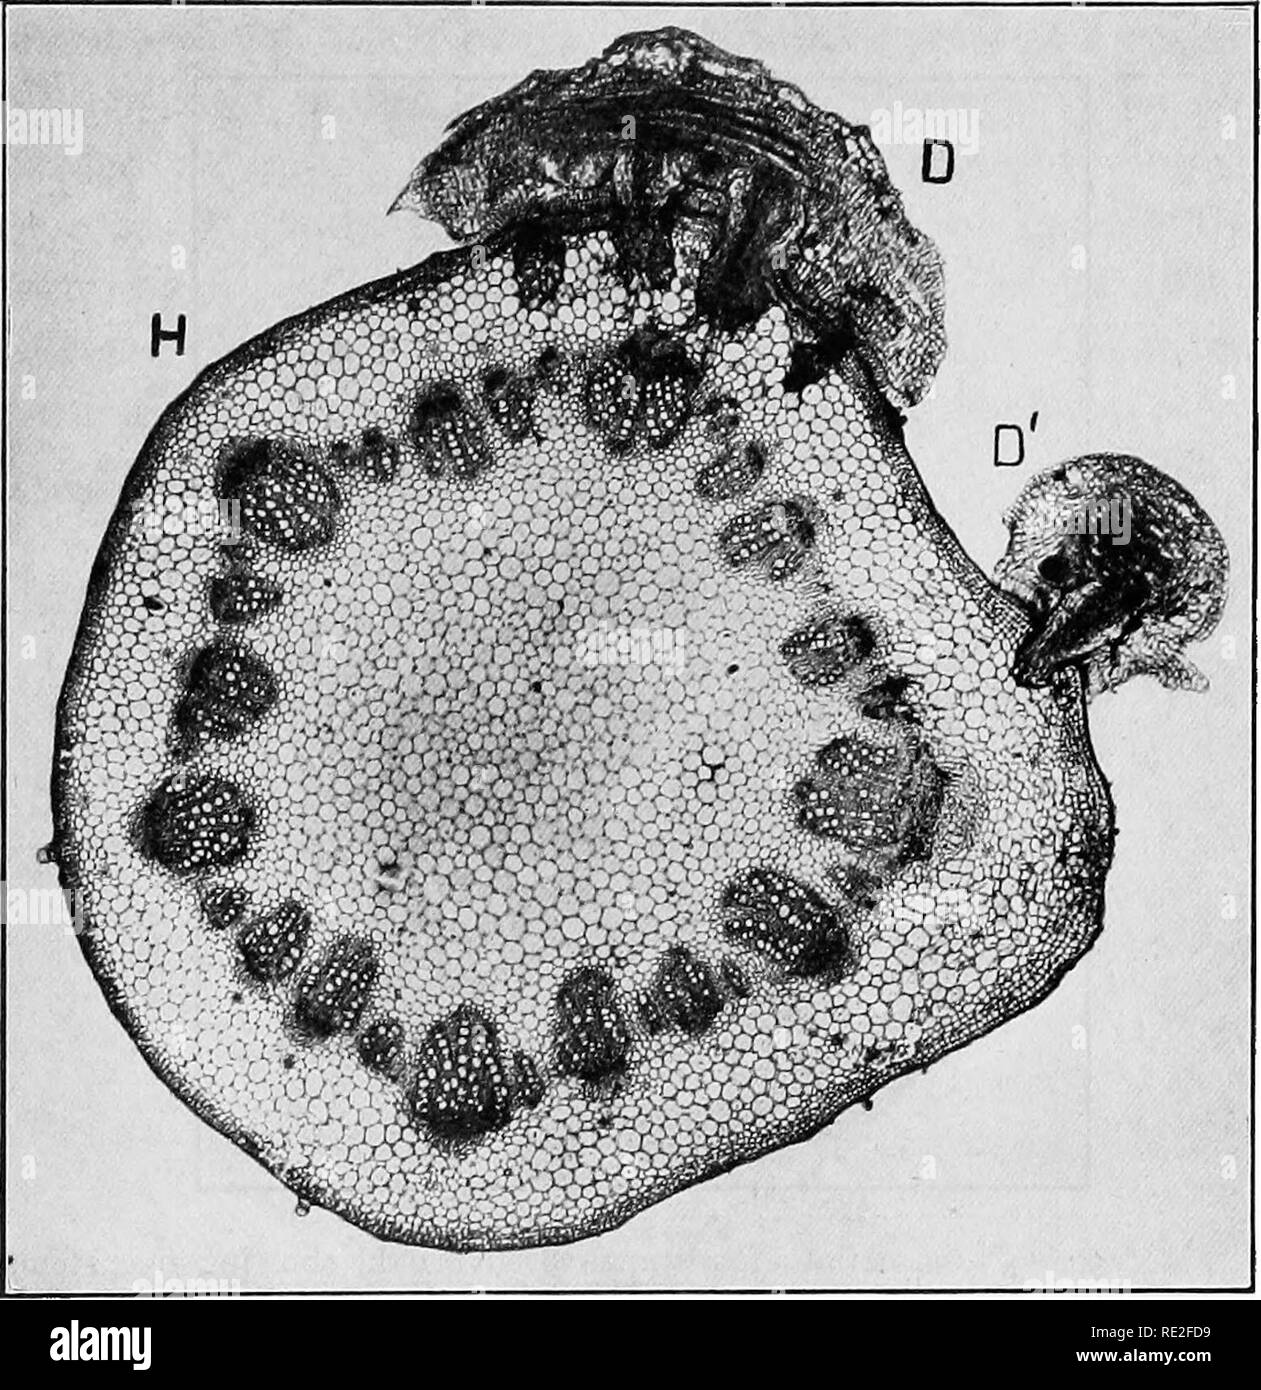 . Fundamentals of botany. Botany. SAPROPHYTISM AND SYMBIOSIS 341 semi-parasitism is that of the blue-green alga, Nostoc, species of which grow in little pockets or cavities in the tissues of the water-fern Salvinia, of Gunnera manicata,. Fig. 249.—Photomicrograph of a cross-section of the stem of a (ficoty- ledonous host-plant infested with the parasite, dodder {Cuscuta Sp.). Note the haustoria extending from the dodder (D, D') into the cortex of the host (H). Greatly enlarged. of Anthoceros, and of other plants, without apparent injury to the host (Fig. 160). 312. Artificial Parasites.—By rec Stock Photo